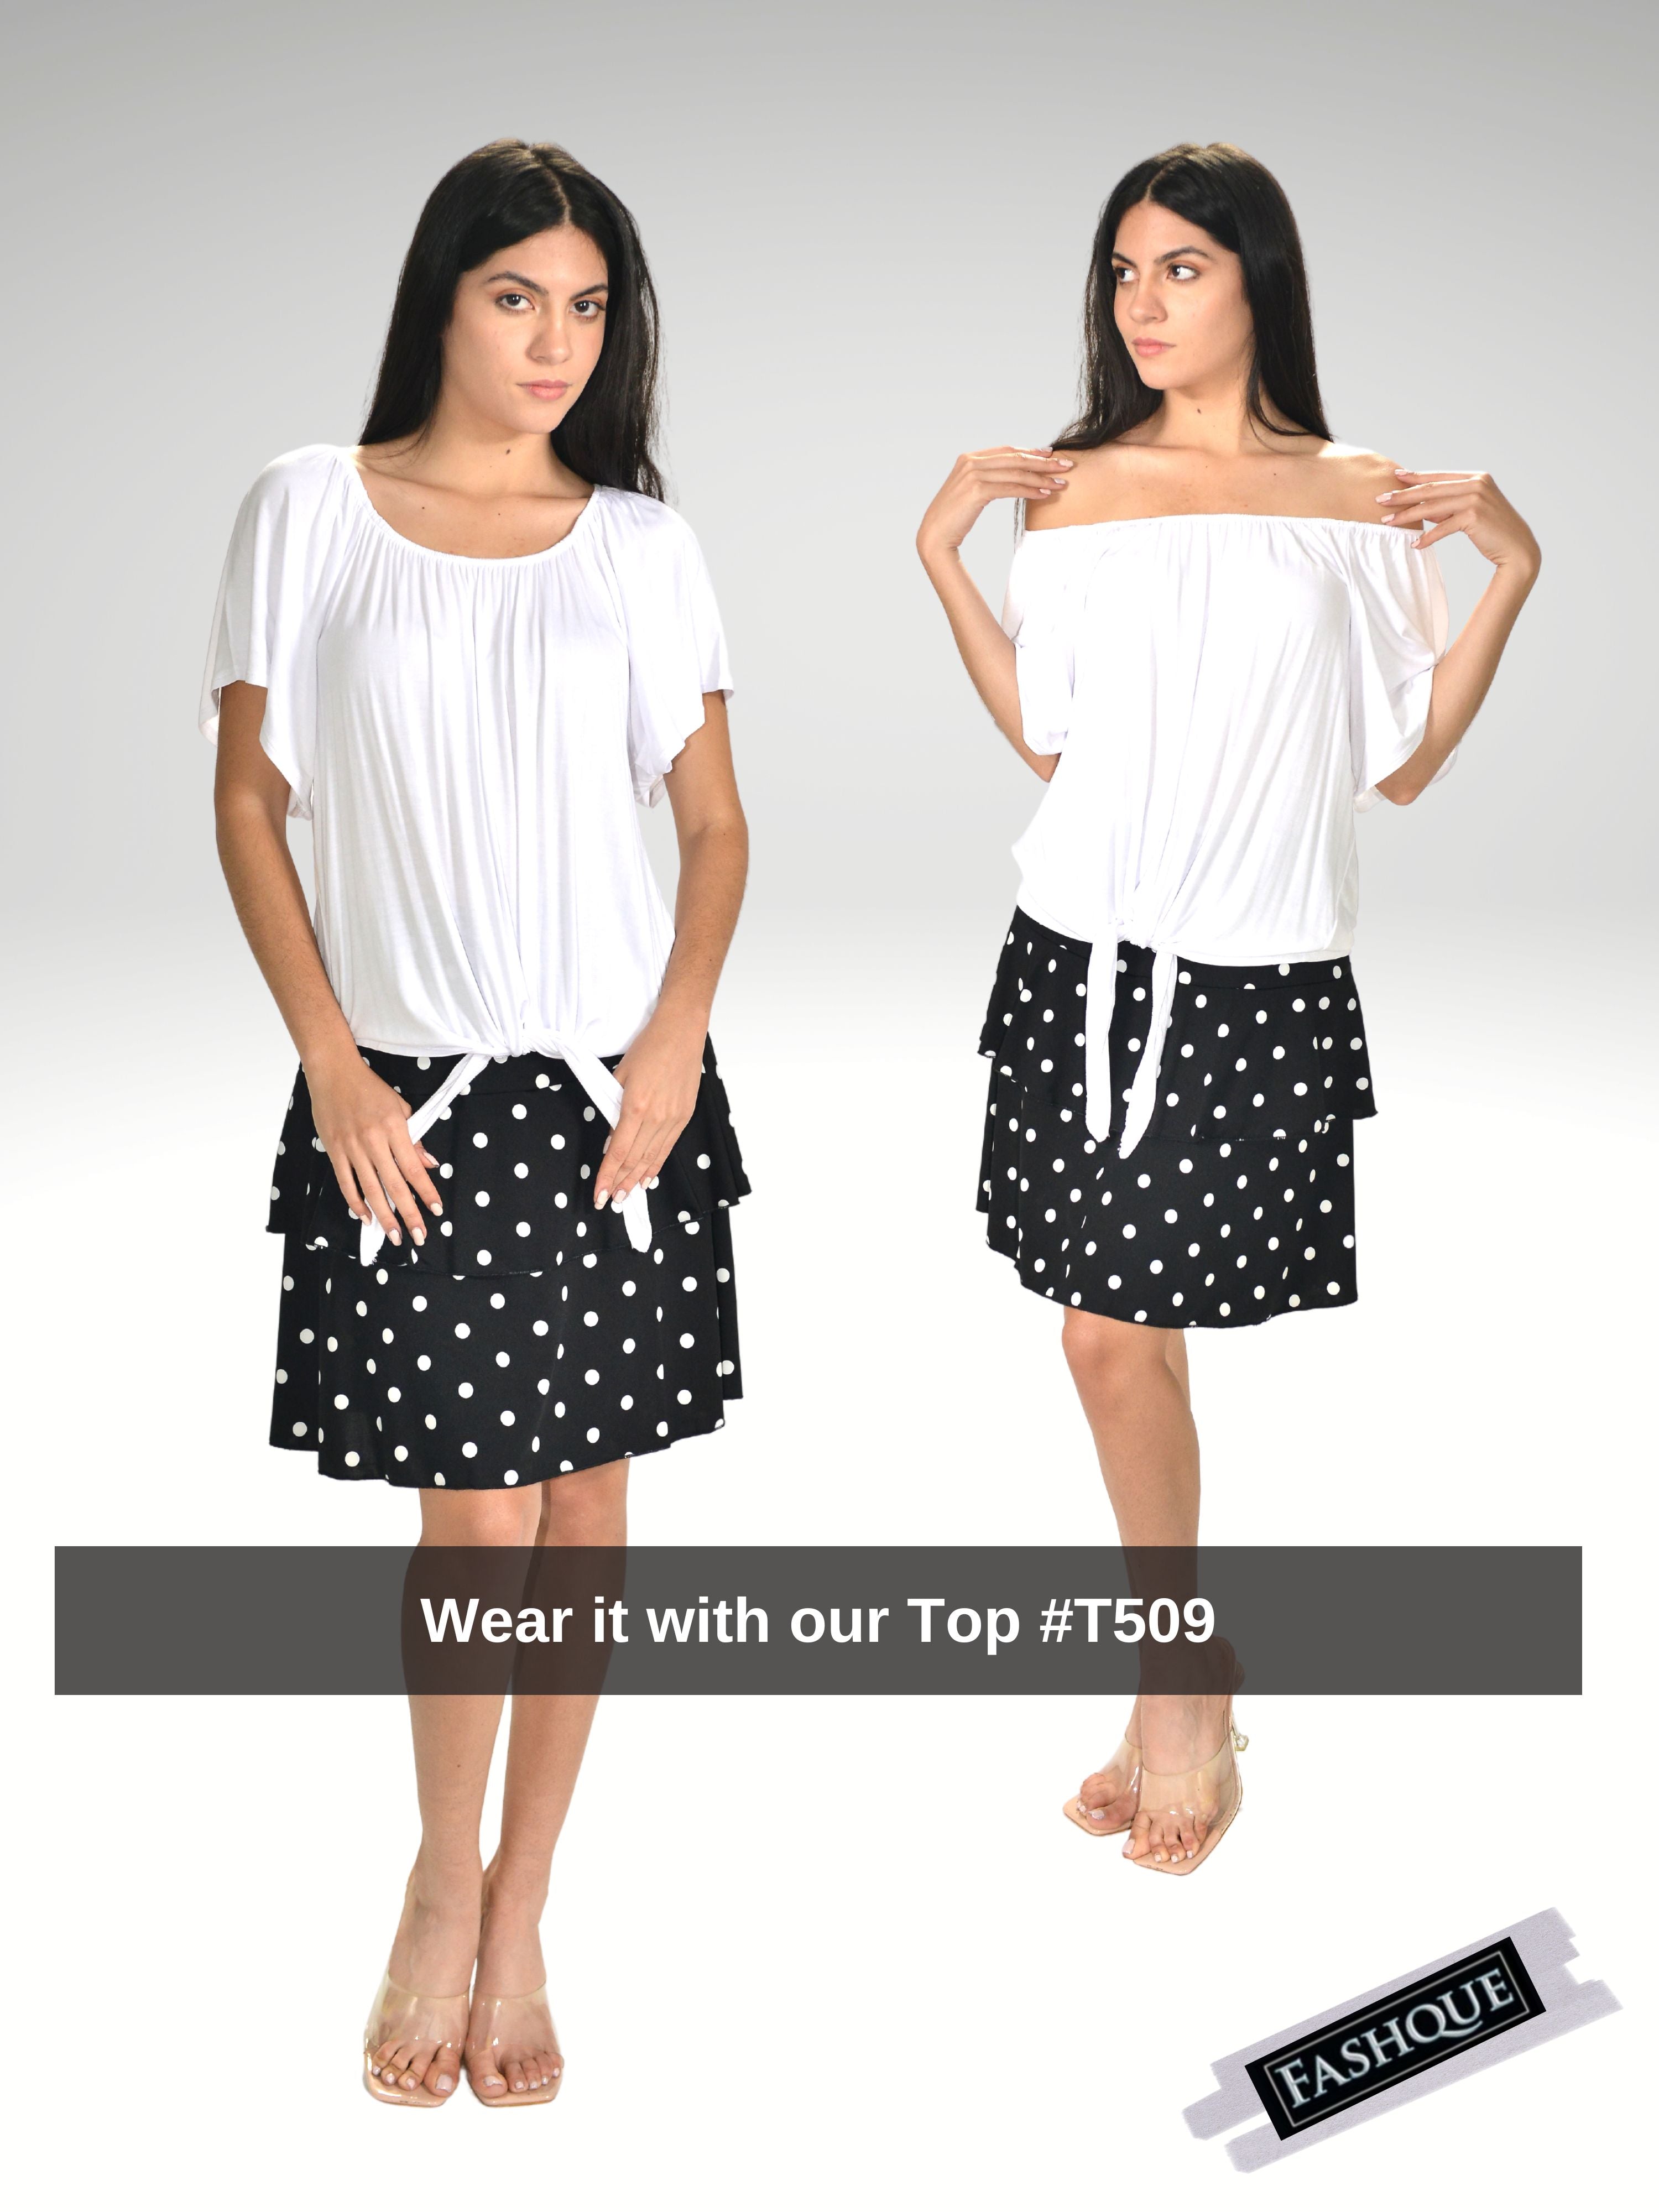 FASHQUE - 3 Tier PRINTED SKORT with the Ruffle in the center - SH001